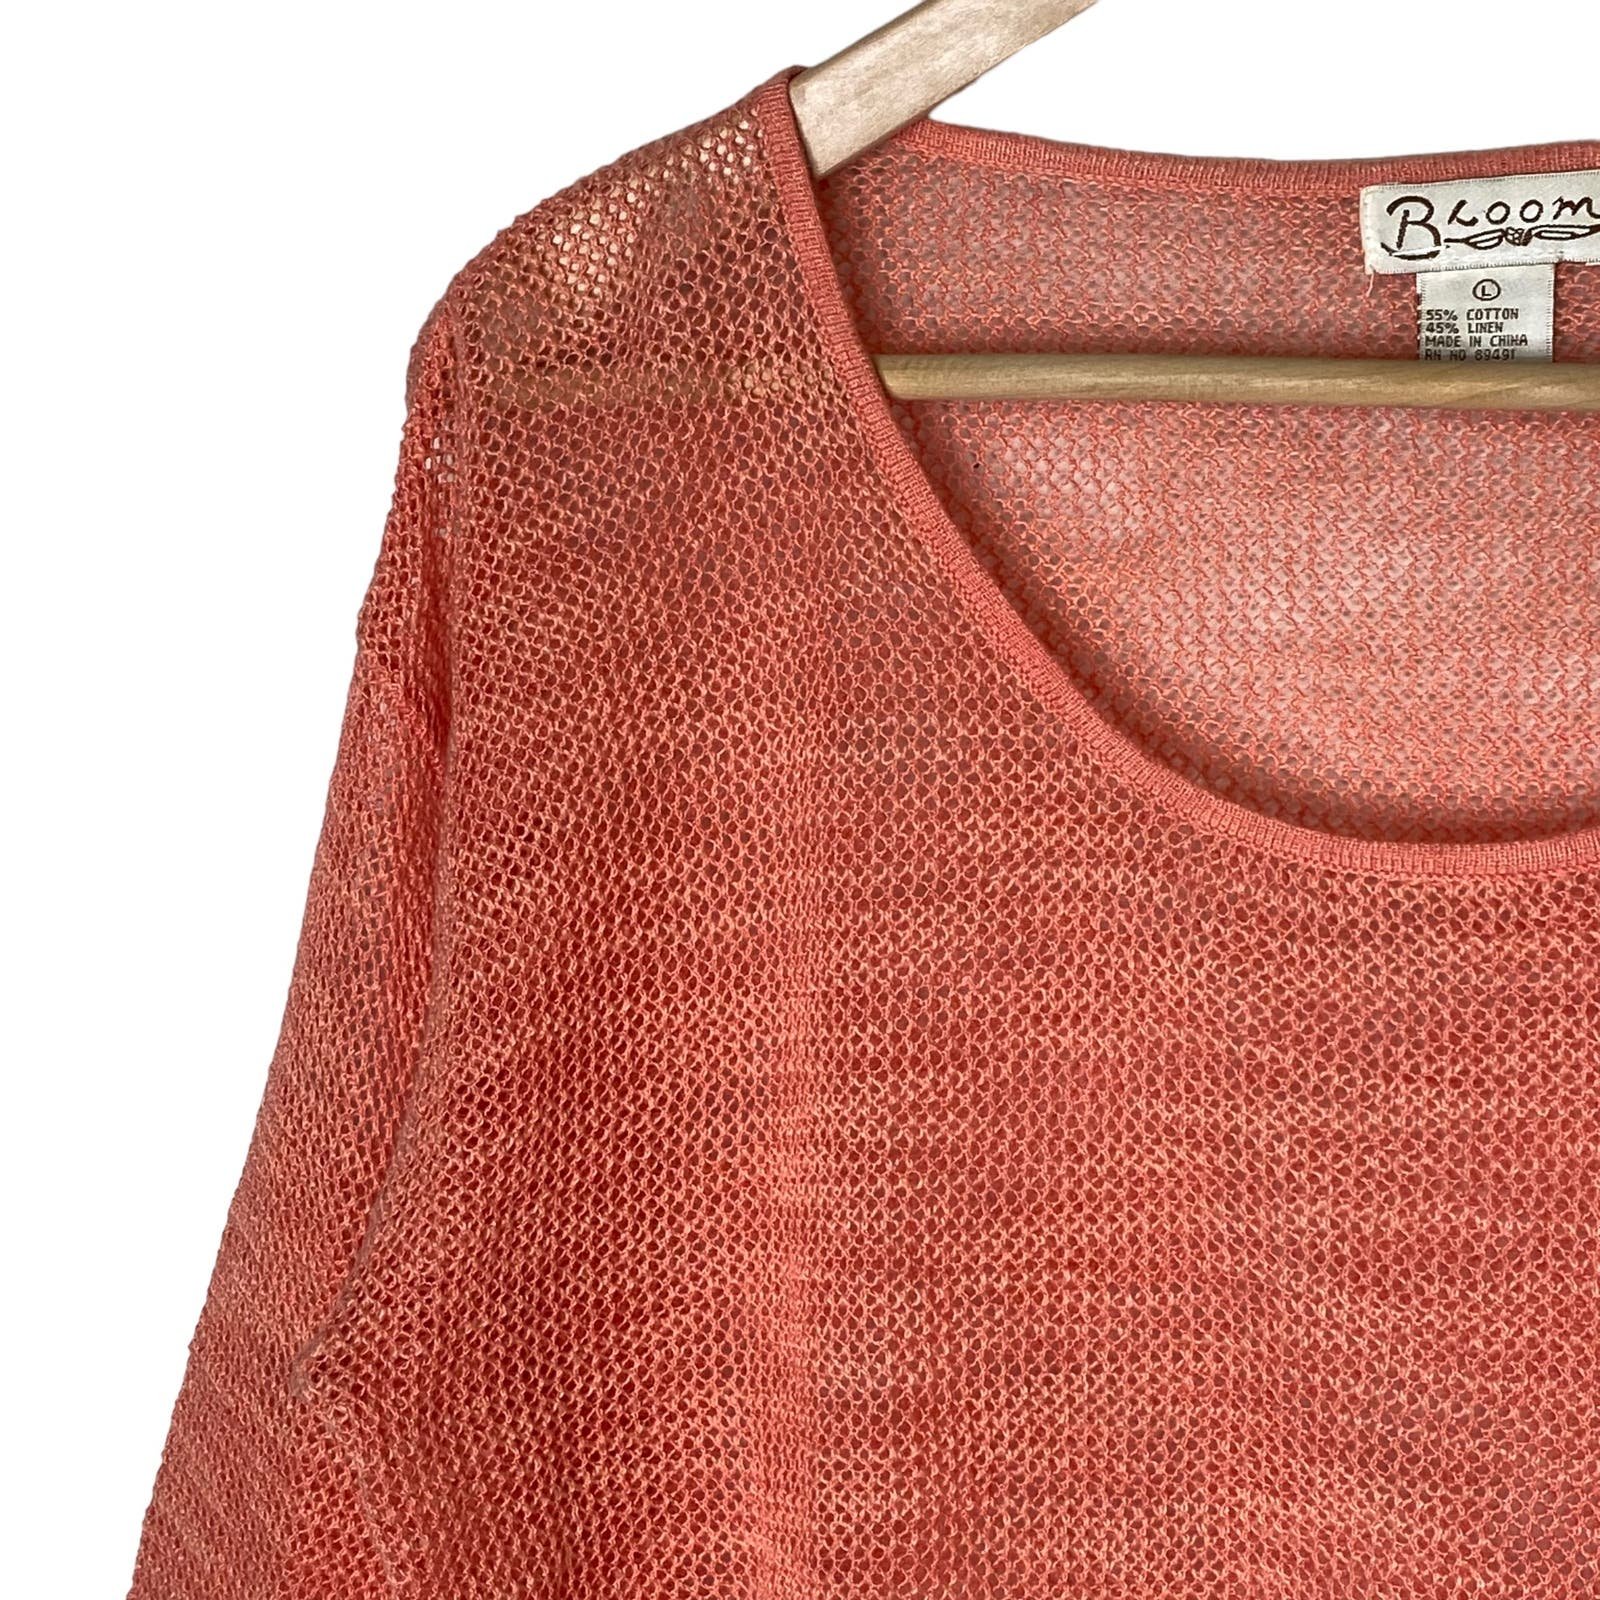 cheapest place to buy  Bloom Linen Blend Sweater Open Knit Coral Scoop Neck Pullover Long Sleeve, Large KwwOedQFQ online store